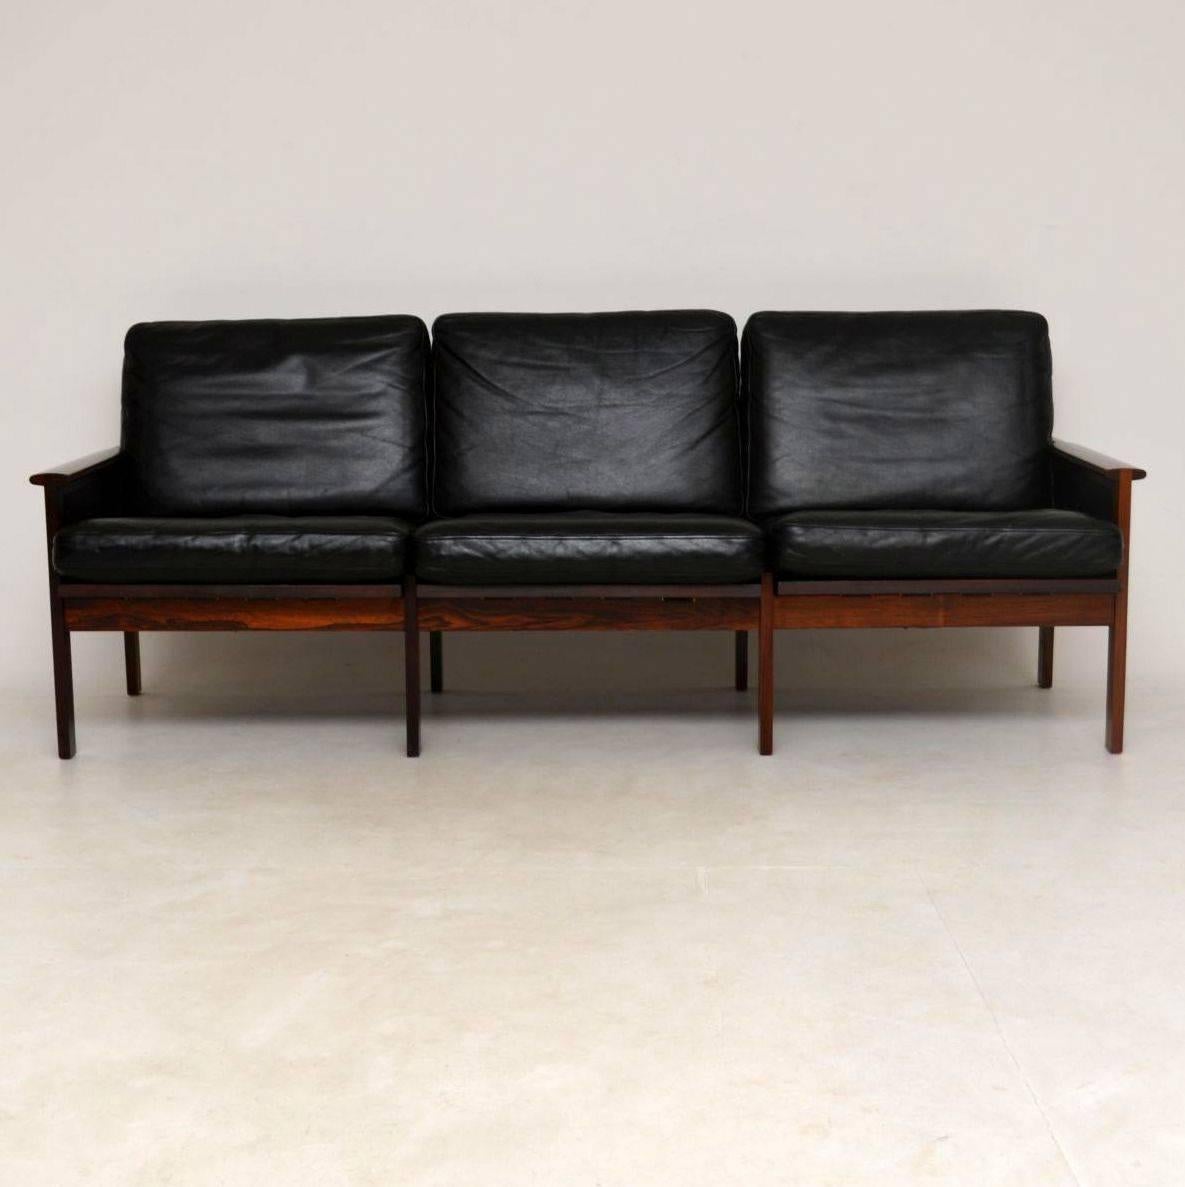 A stunning vintage three seat black leather sofa, this was designed by Illum Wikkelso in 1958 and was made by Niels Eilersen. We have had this fully restored so the condition is superb throughout, the frame has been stripped and re-polished; there